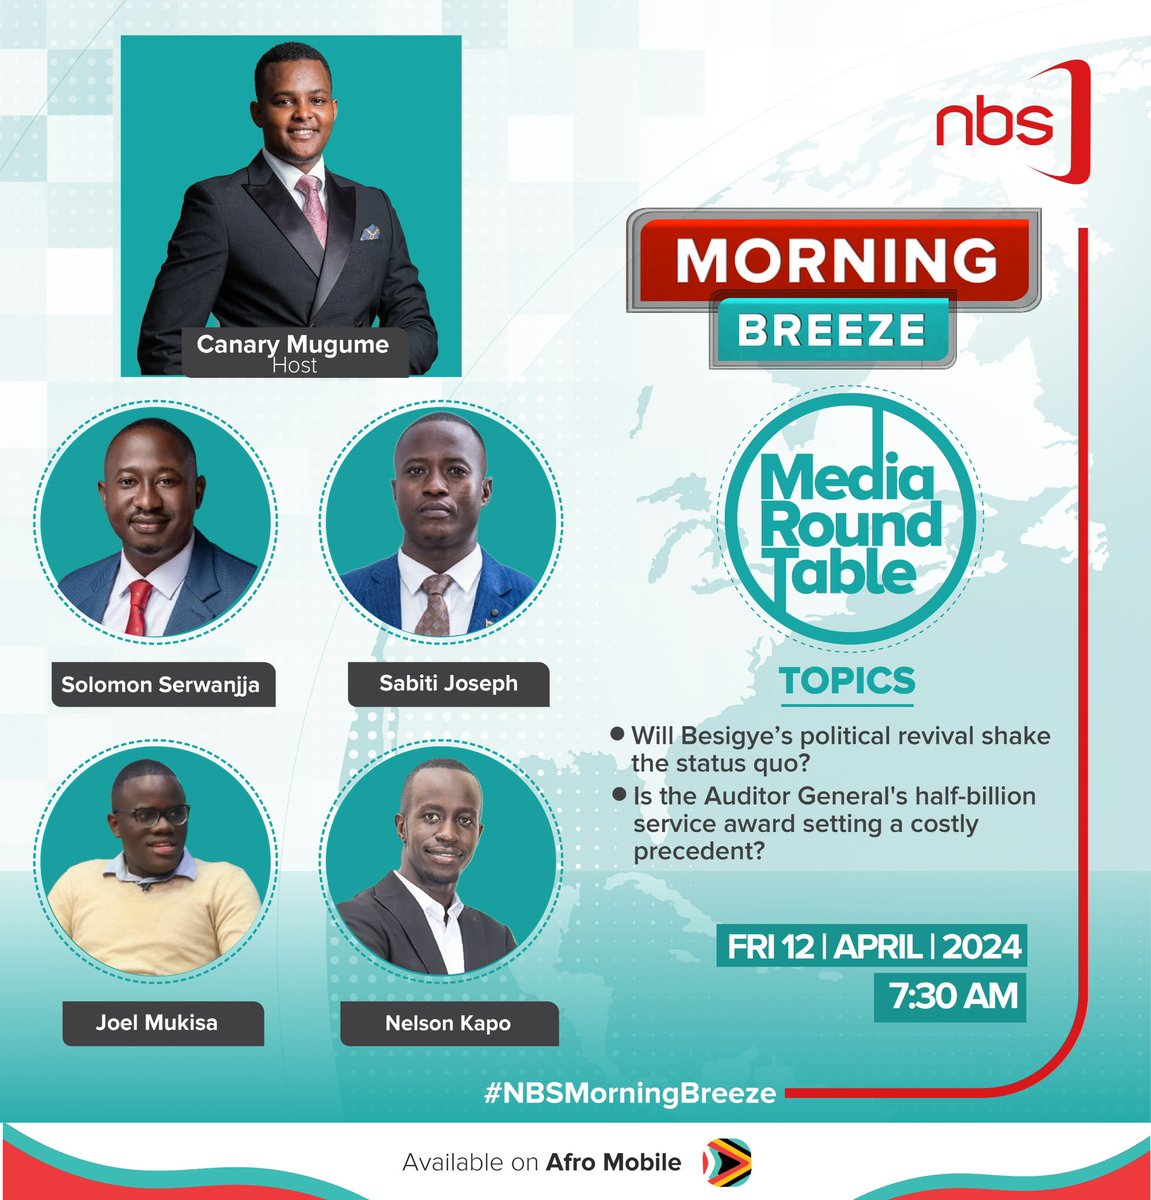 Now this is the real media round table, it's actually a terrific panel with @CanaryMugume on the steering hosting @SolomonSerwanjj of @AfricanIIJ @NellyKapo from @StateHouseUg @SabitiJoseph from @Parliament_Ug